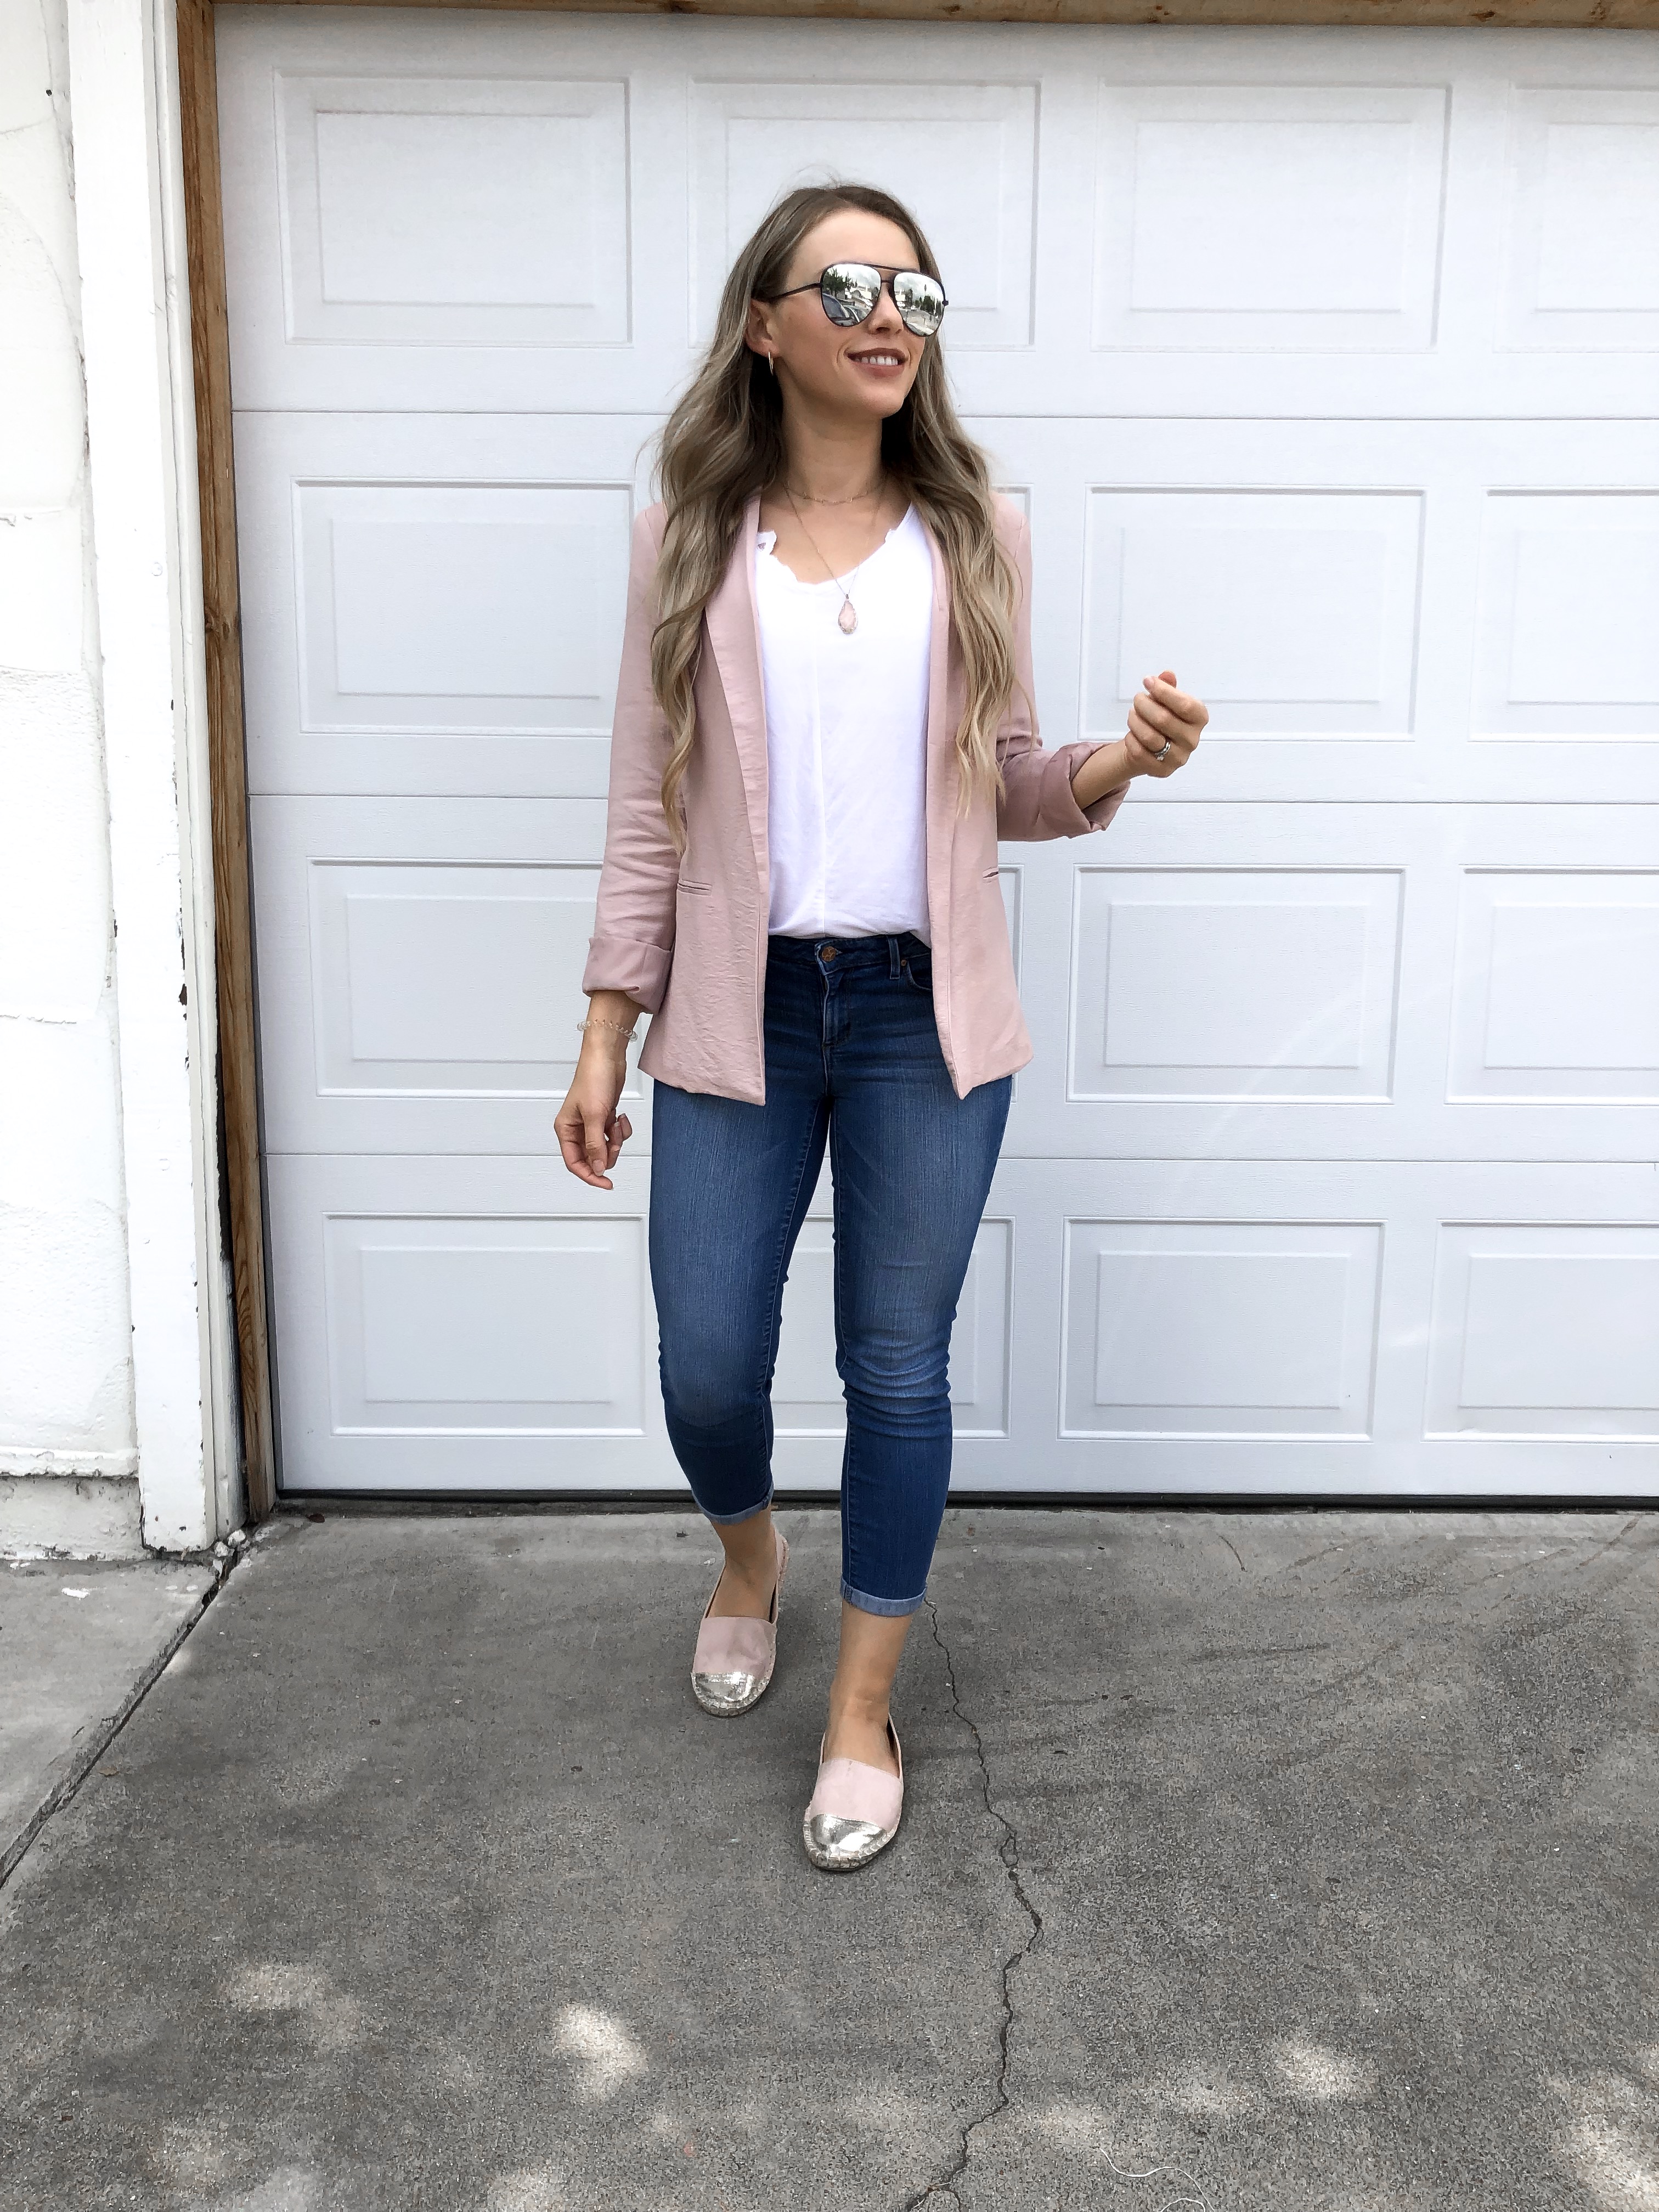 womens outfit pink blazer over white tee shirt and ripped jeans